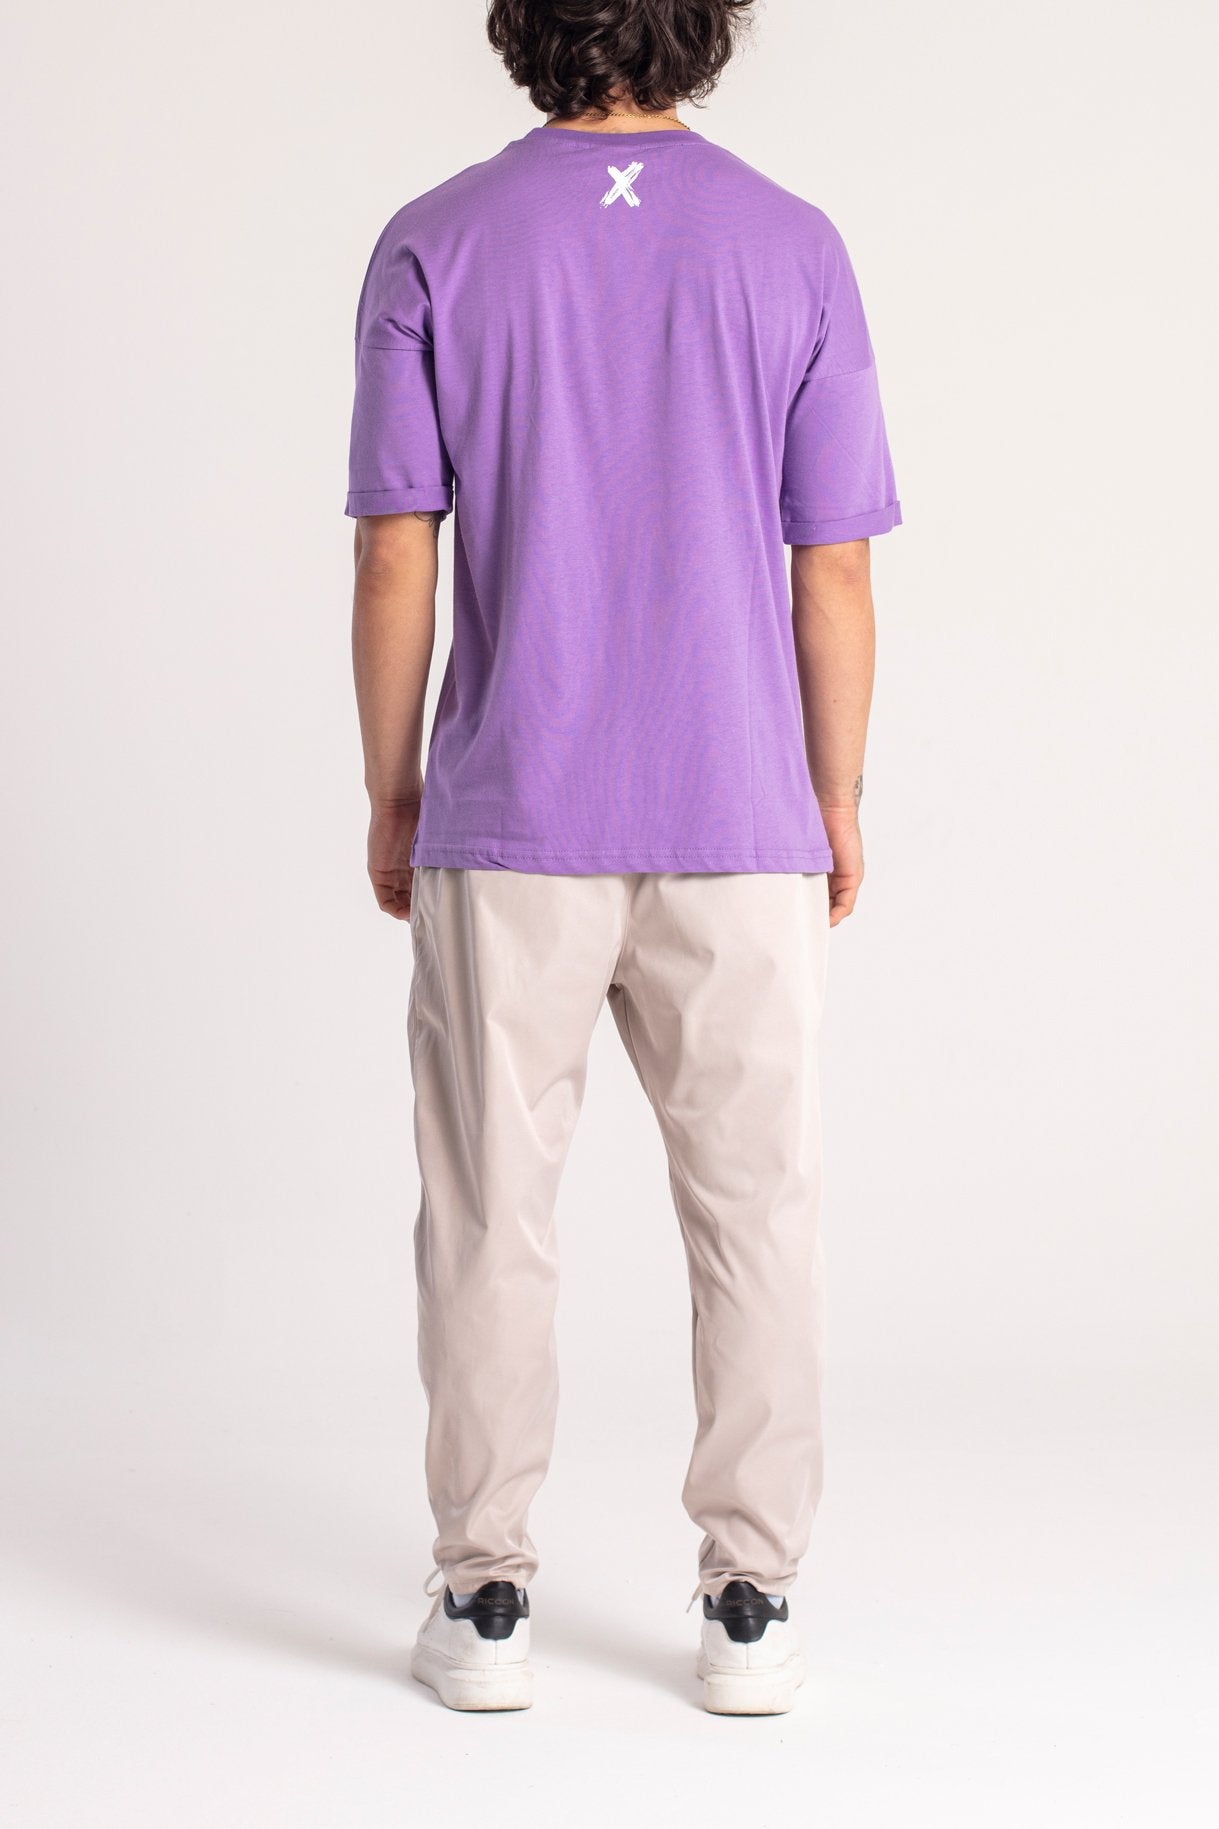 T-SHIRT OVERSIZE - GET THE HARMONY - COLORE VIOLA